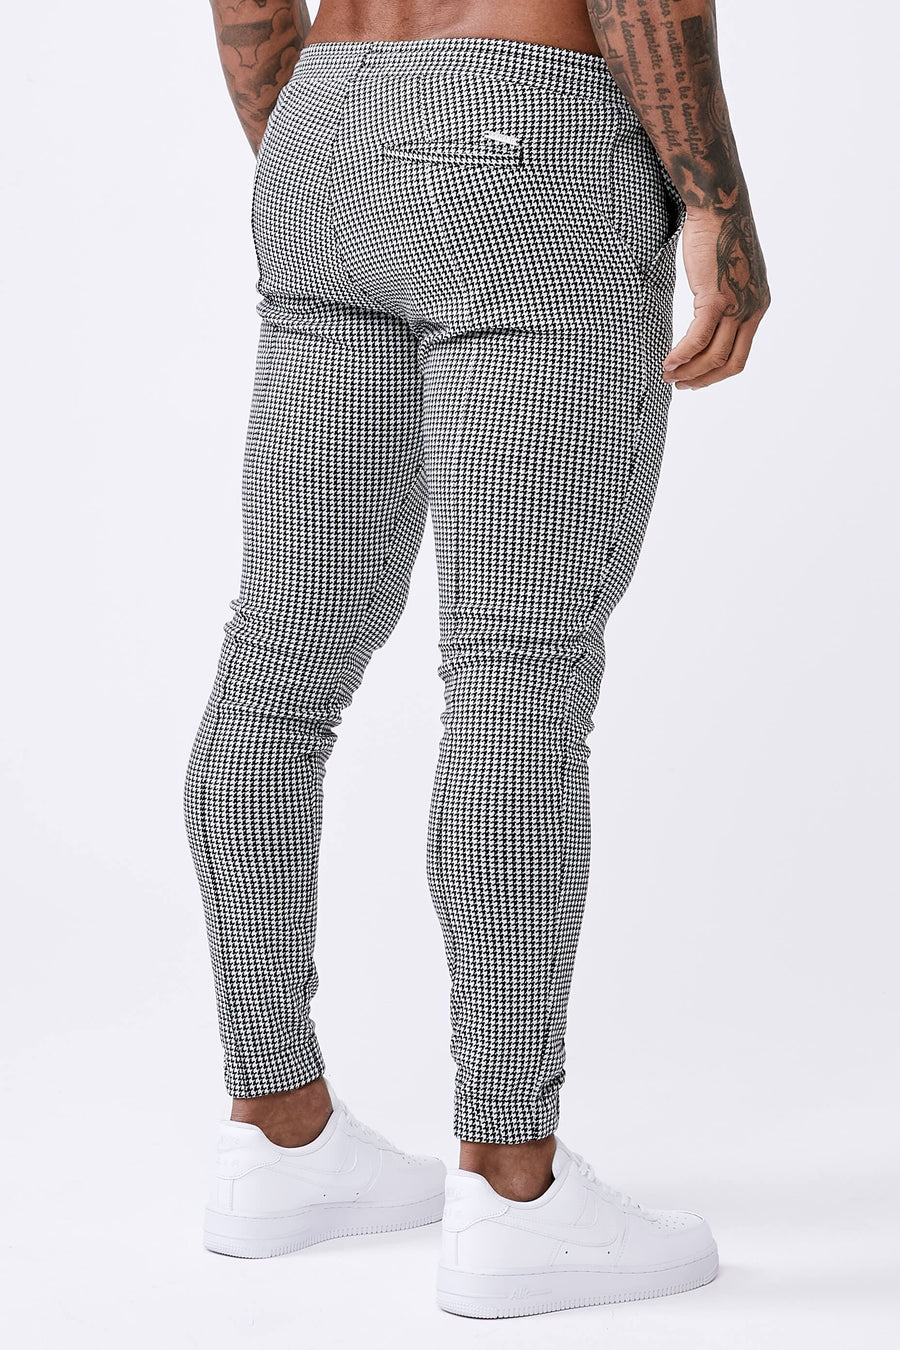 Legend London Trousers HOUNDSTOOTH CHECK CUFFED TROUSER - BLACK & WHITE